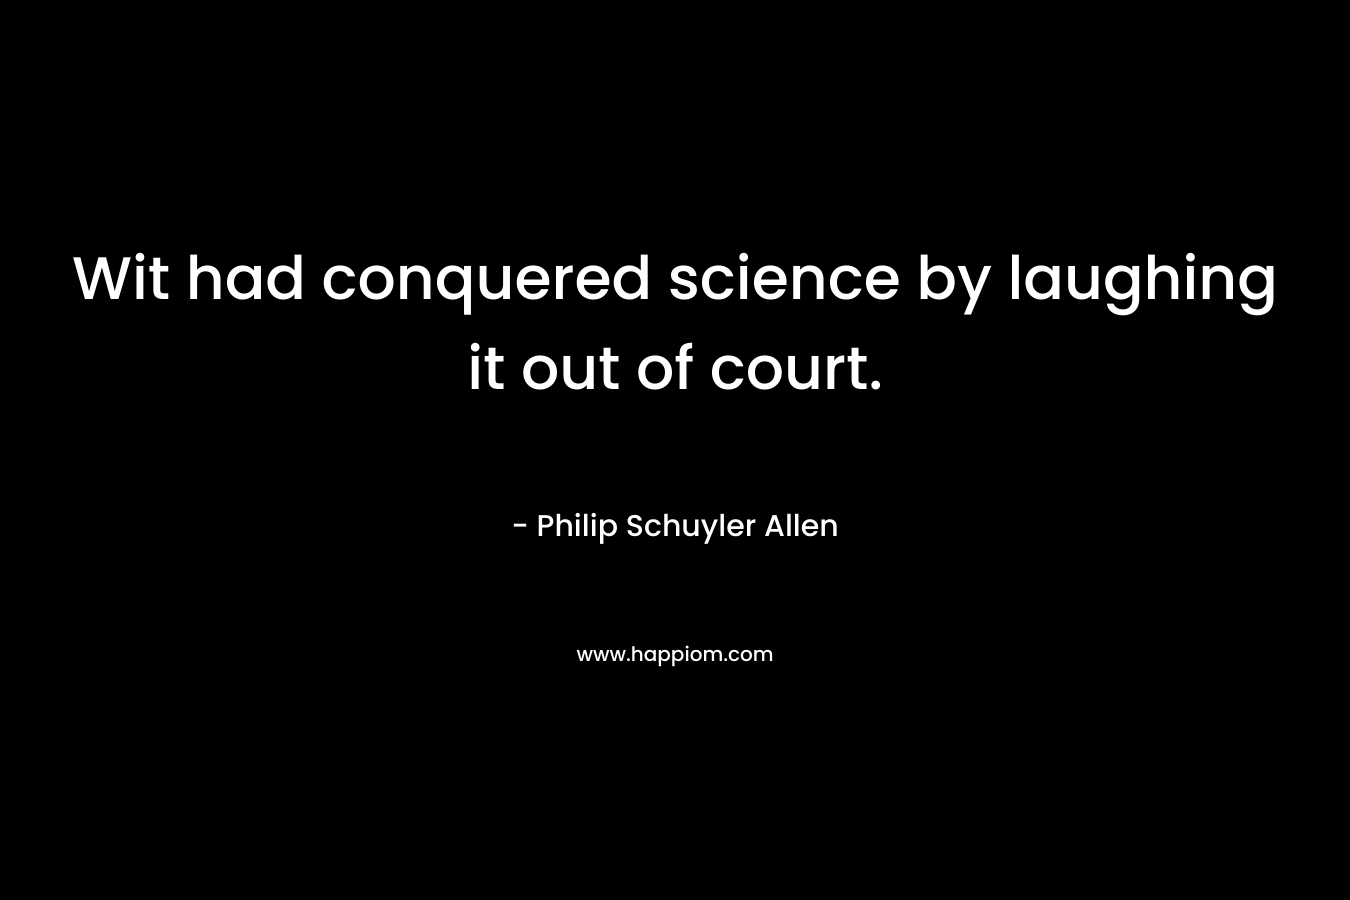 Wit had conquered science by laughing it out of court. – Philip Schuyler Allen